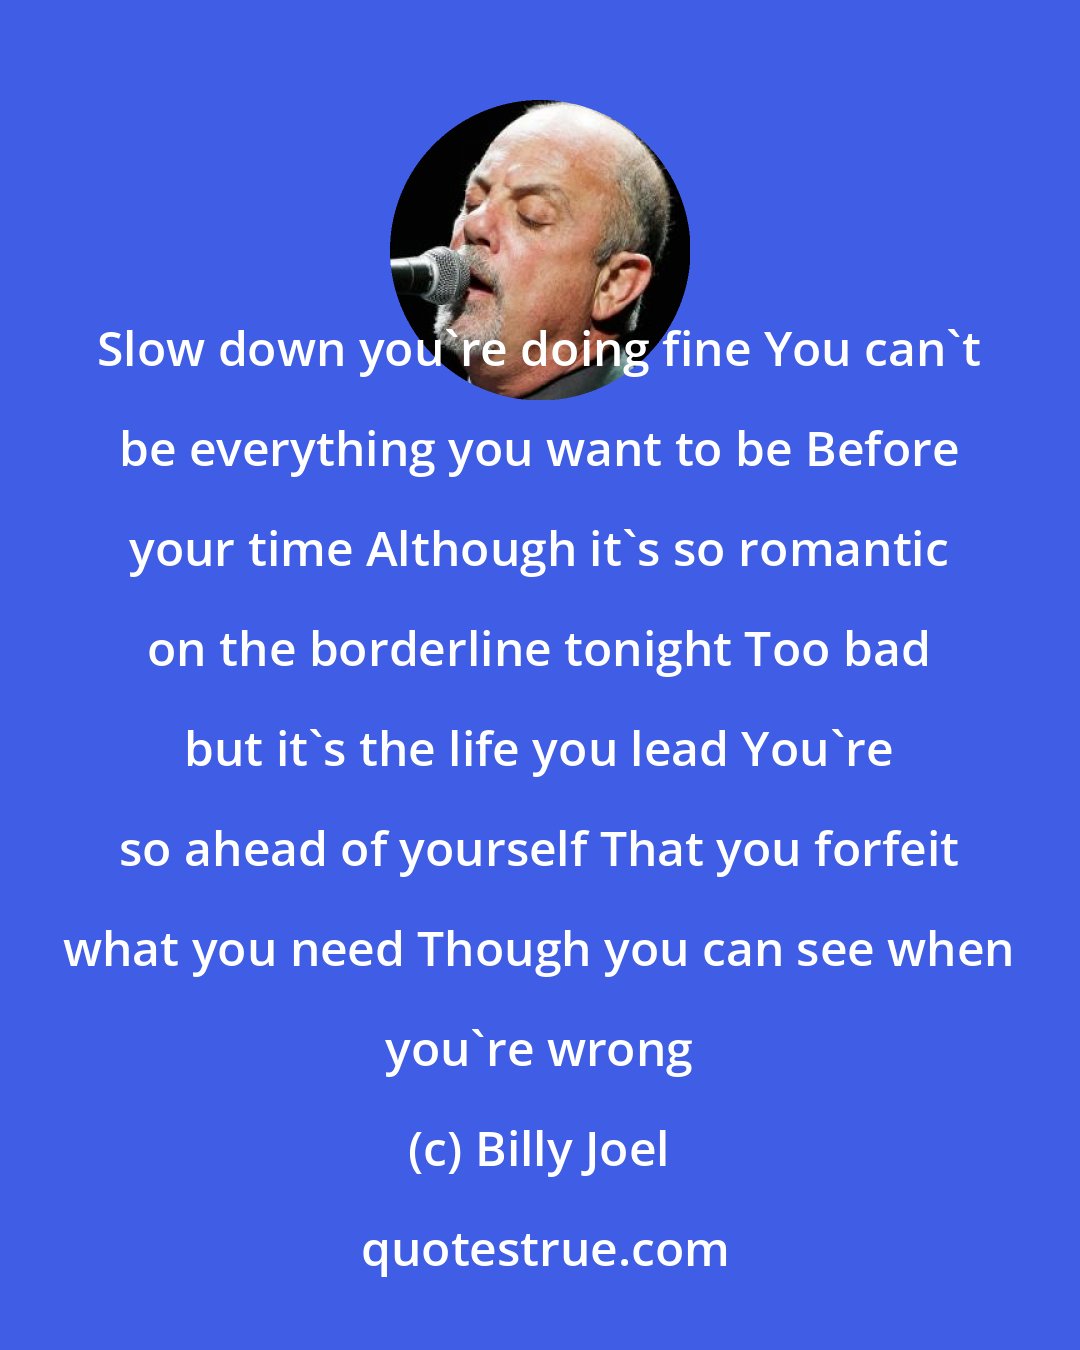 Billy Joel: Slow down you're doing fine You can't be everything you want to be Before your time Although it's so romantic on the borderline tonight Too bad but it's the life you lead You're so ahead of yourself That you forfeit what you need Though you can see when you're wrong